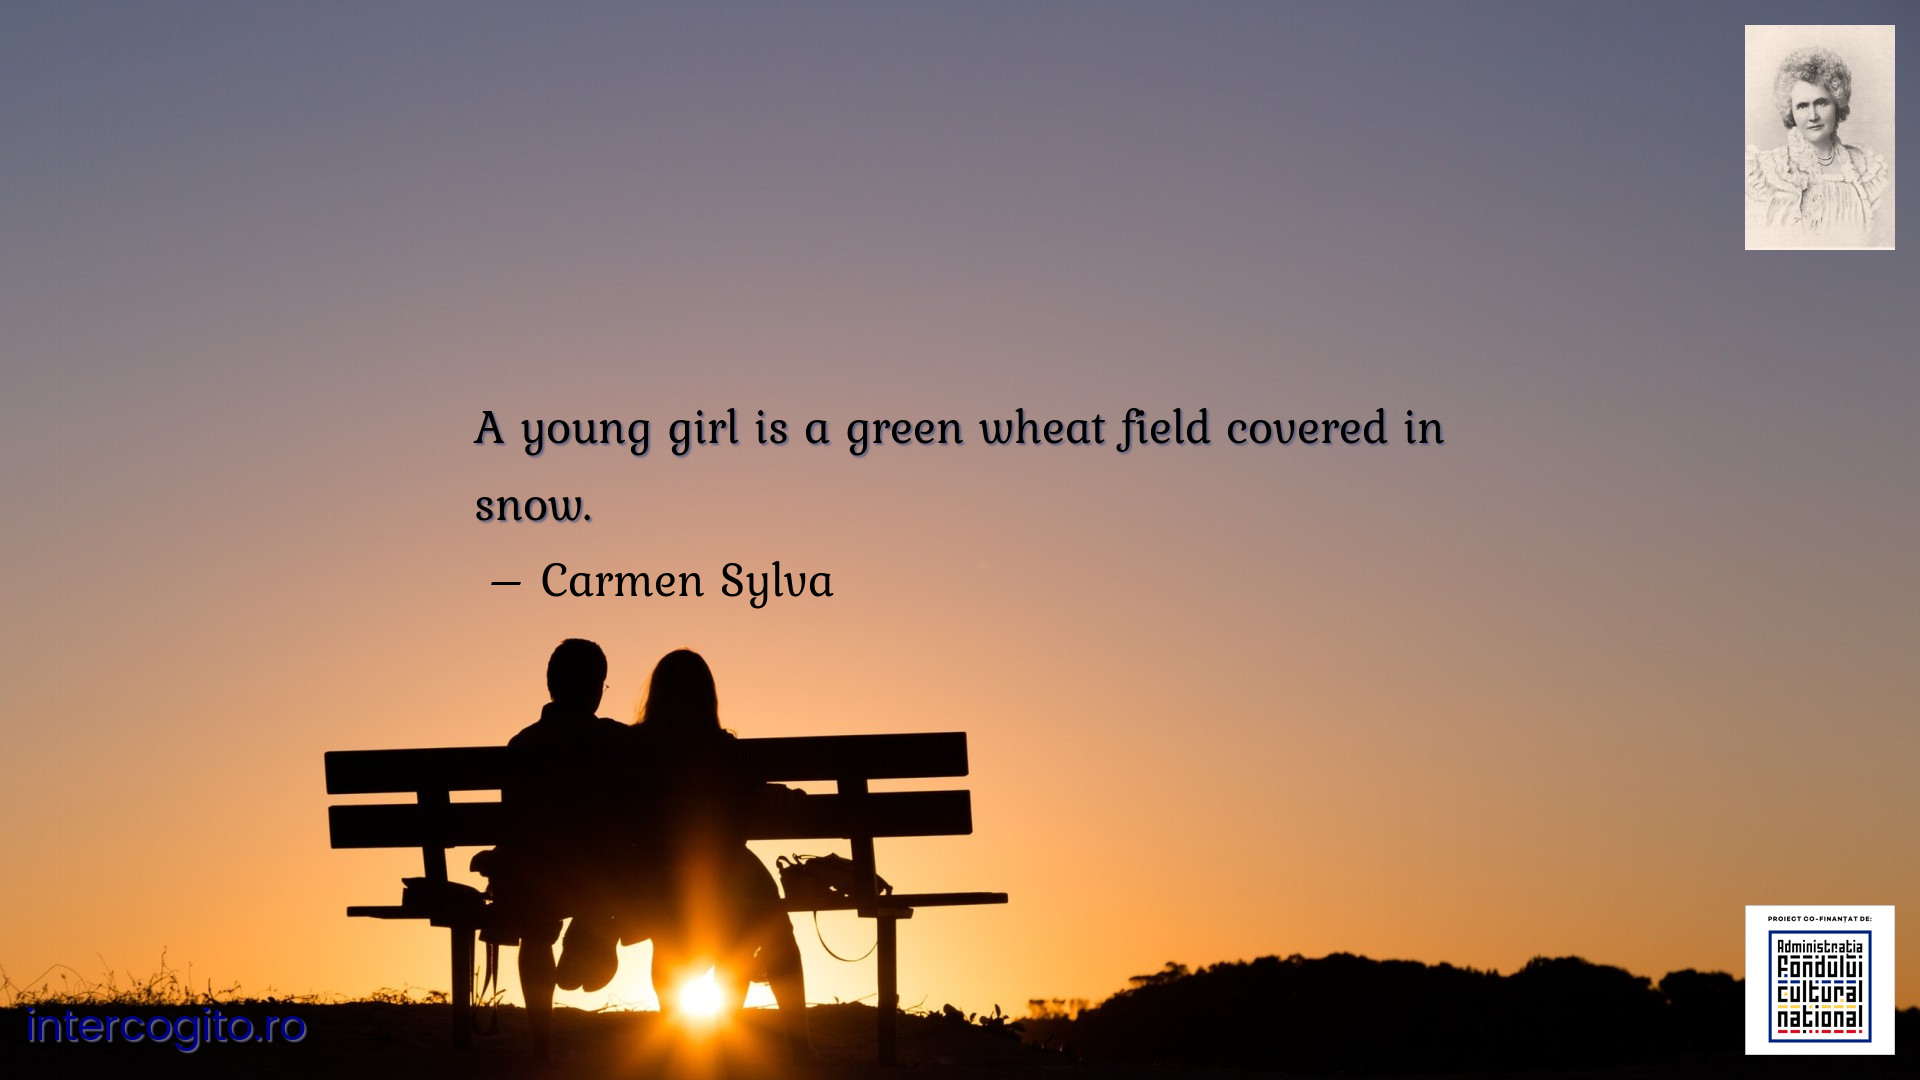 A young girl is a green wheat field covered in snow.